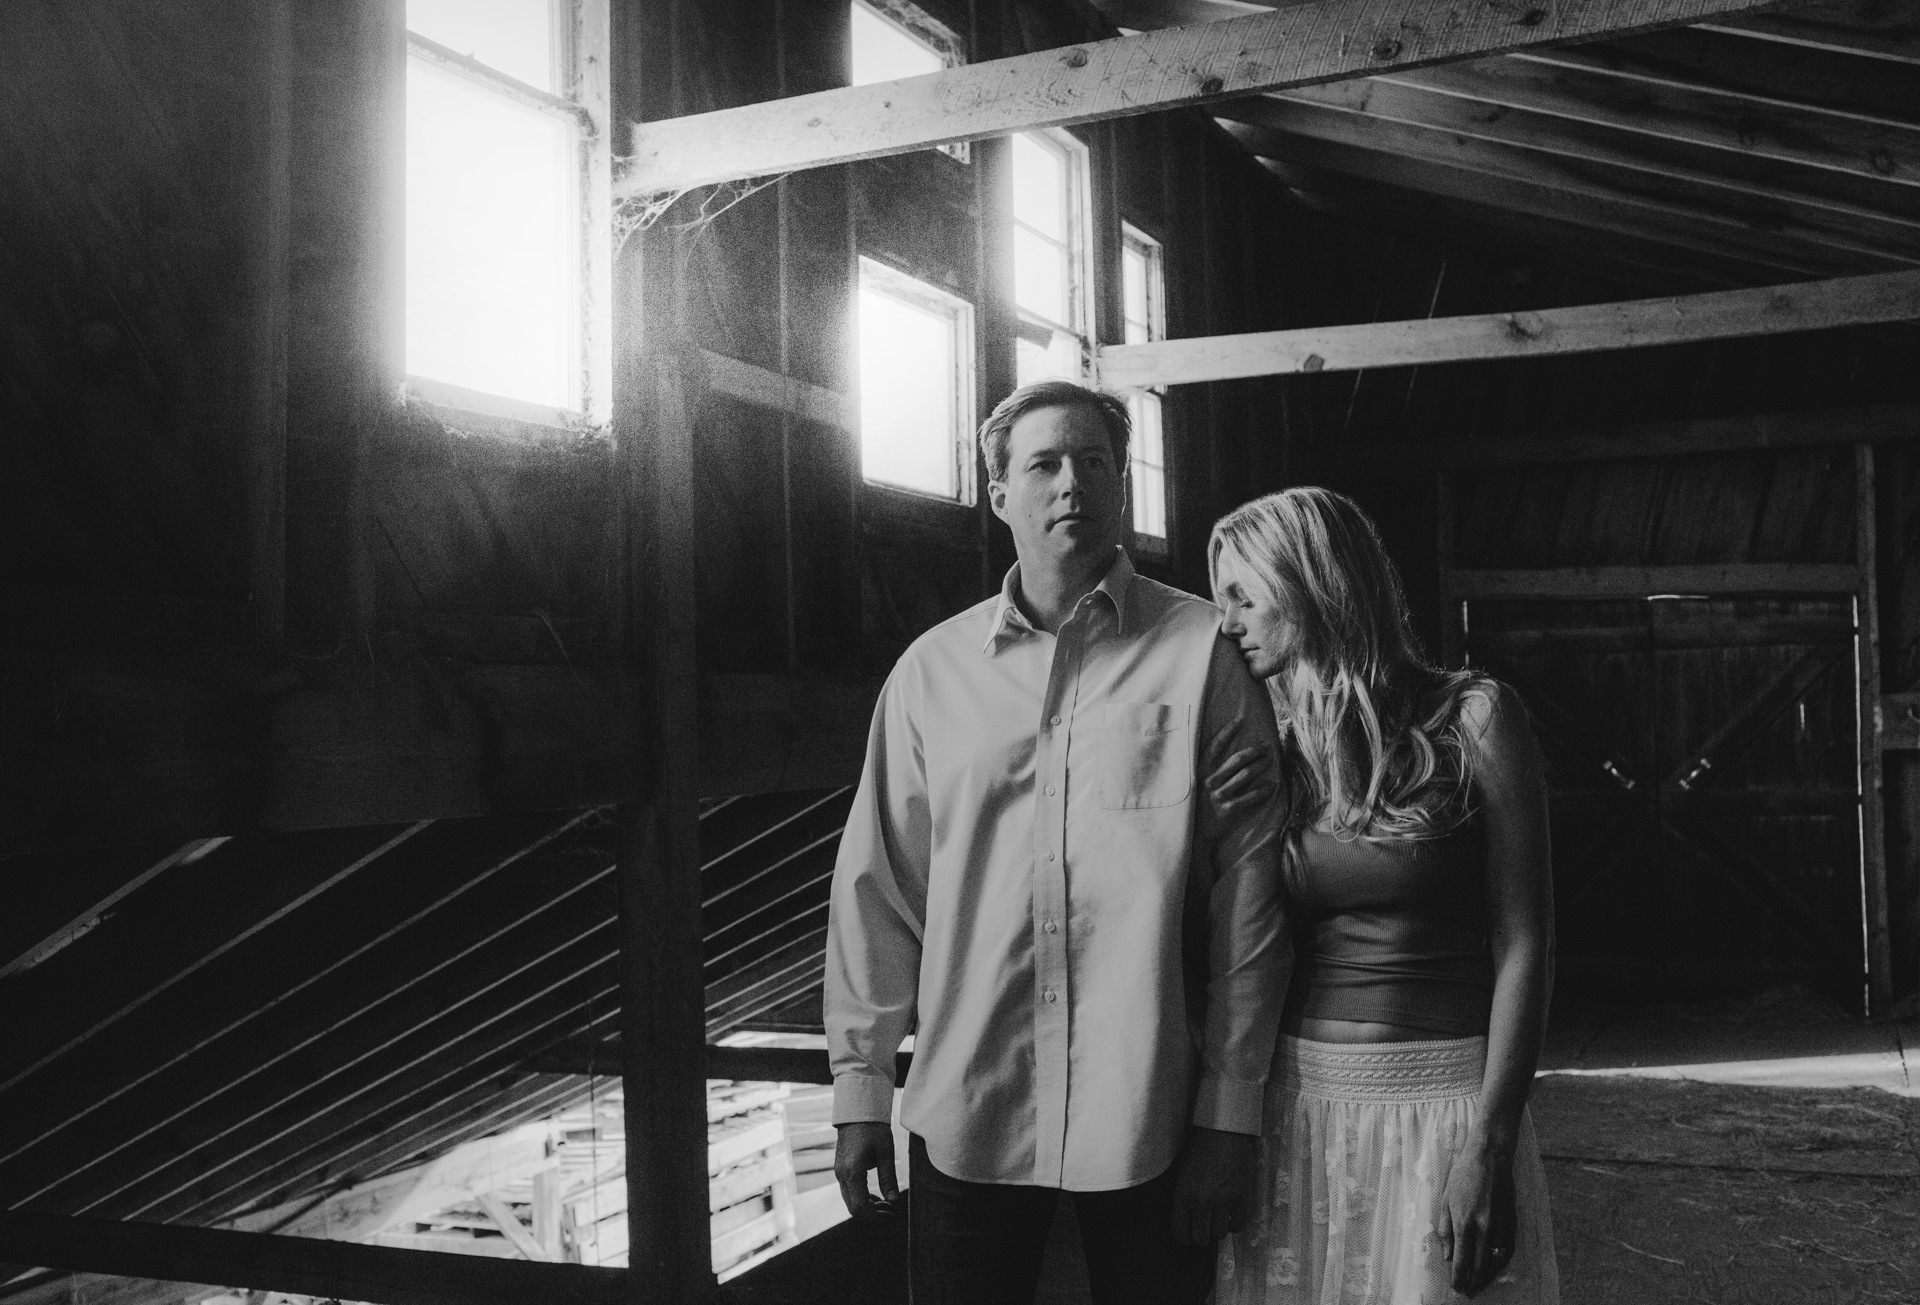  An engagement photo shoot in an old barn 